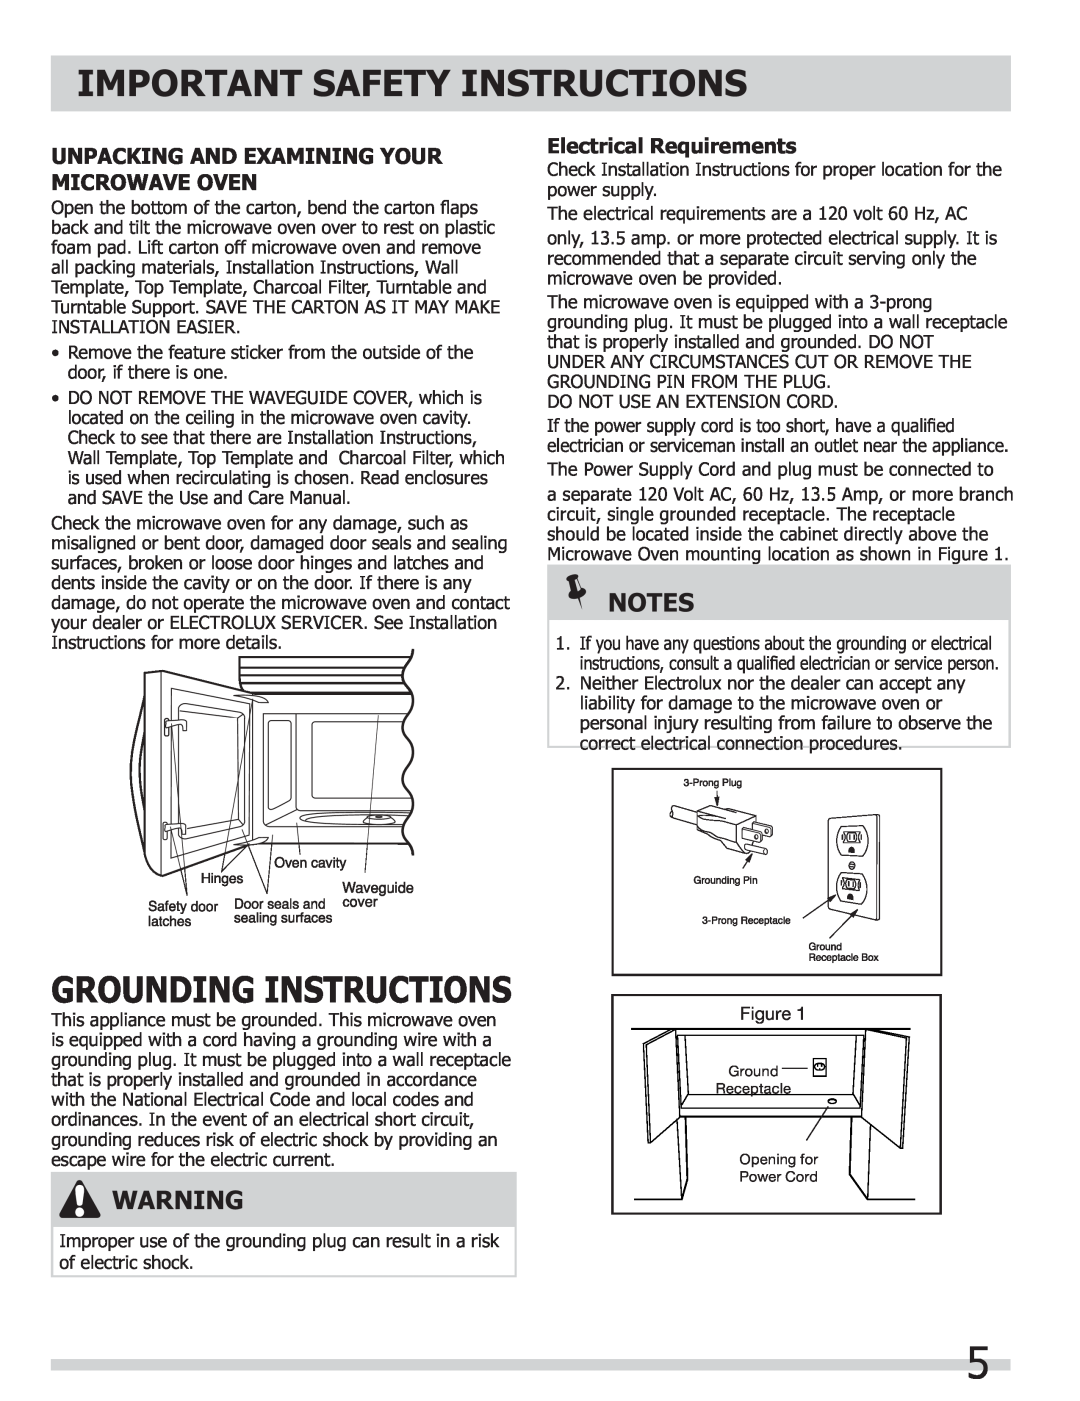 Frigidaire FGMV153CLW Grounding Instructions, Unpacking And Examining Your Microwave Oven, Electrical Requirements 